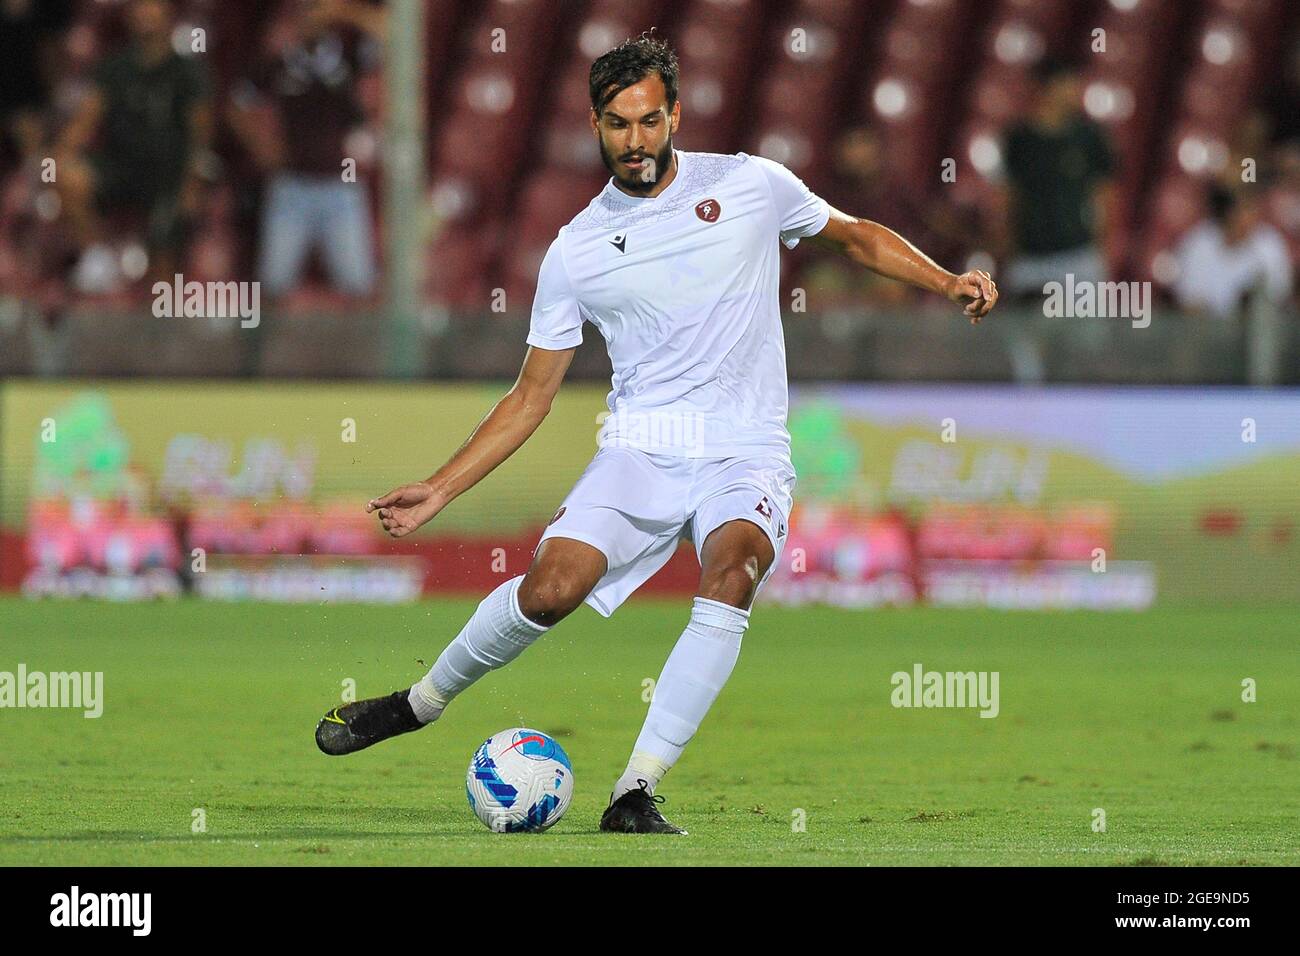 Dimitros Stavropoulos player of Reggina, during the Italian Cup match between Salernitana vs Reggina final result 2-0, match played at the Arechi Stad Stock Photo